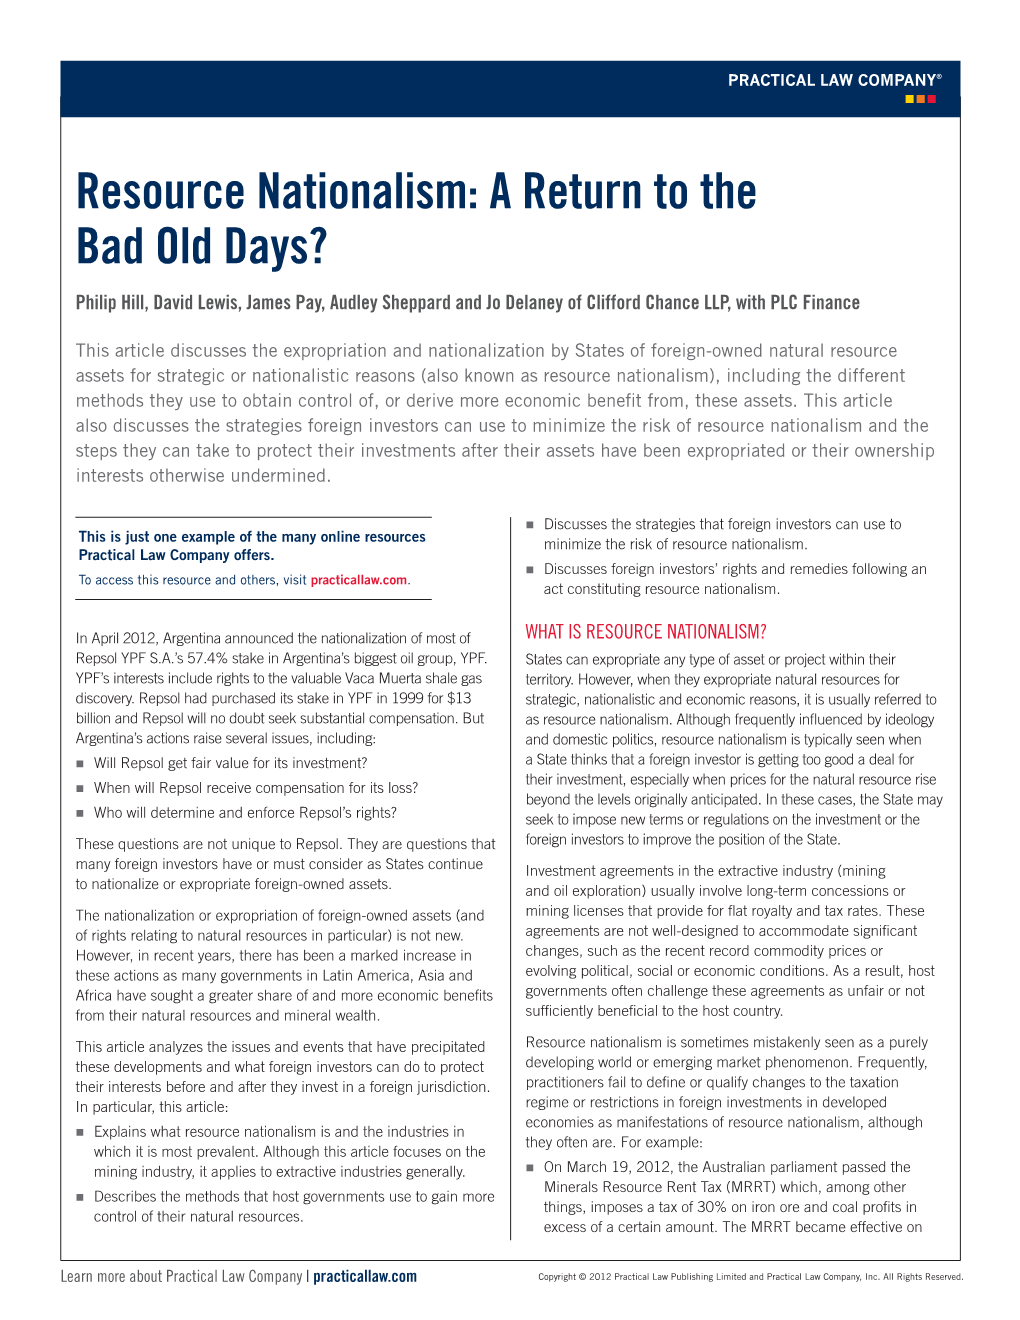 Resource Nationalism: a Return to the Bad Old Days? Philip Hill, David Lewis, James Pay, Audley Sheppard and Jo Delaney of Clifford Chance LLP, with PLC Finance